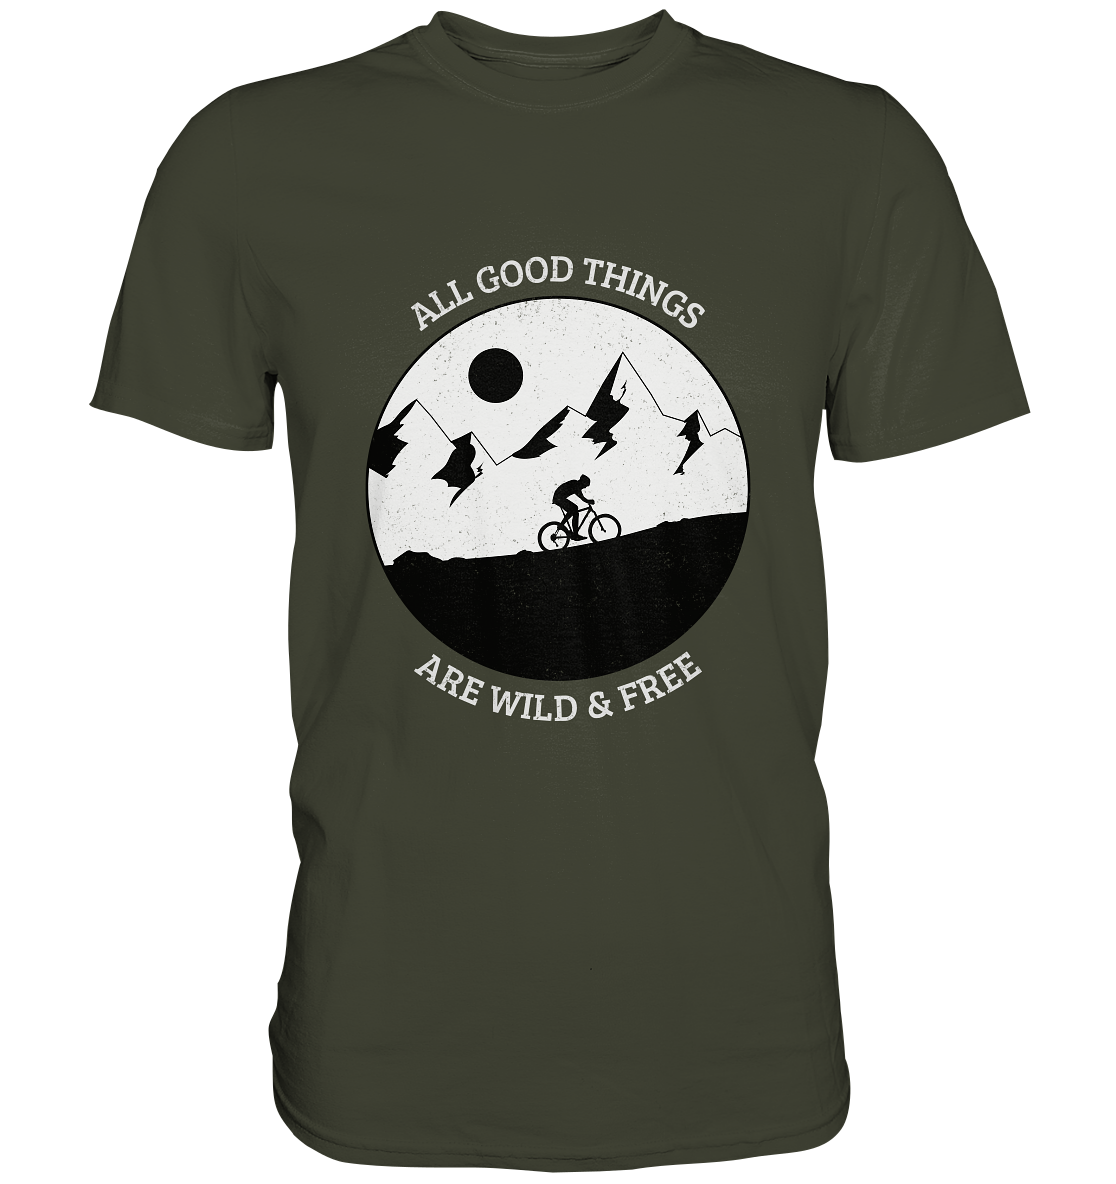 All good things are wild and free. Moutainbike Bike Outdoor - Premium Shirt